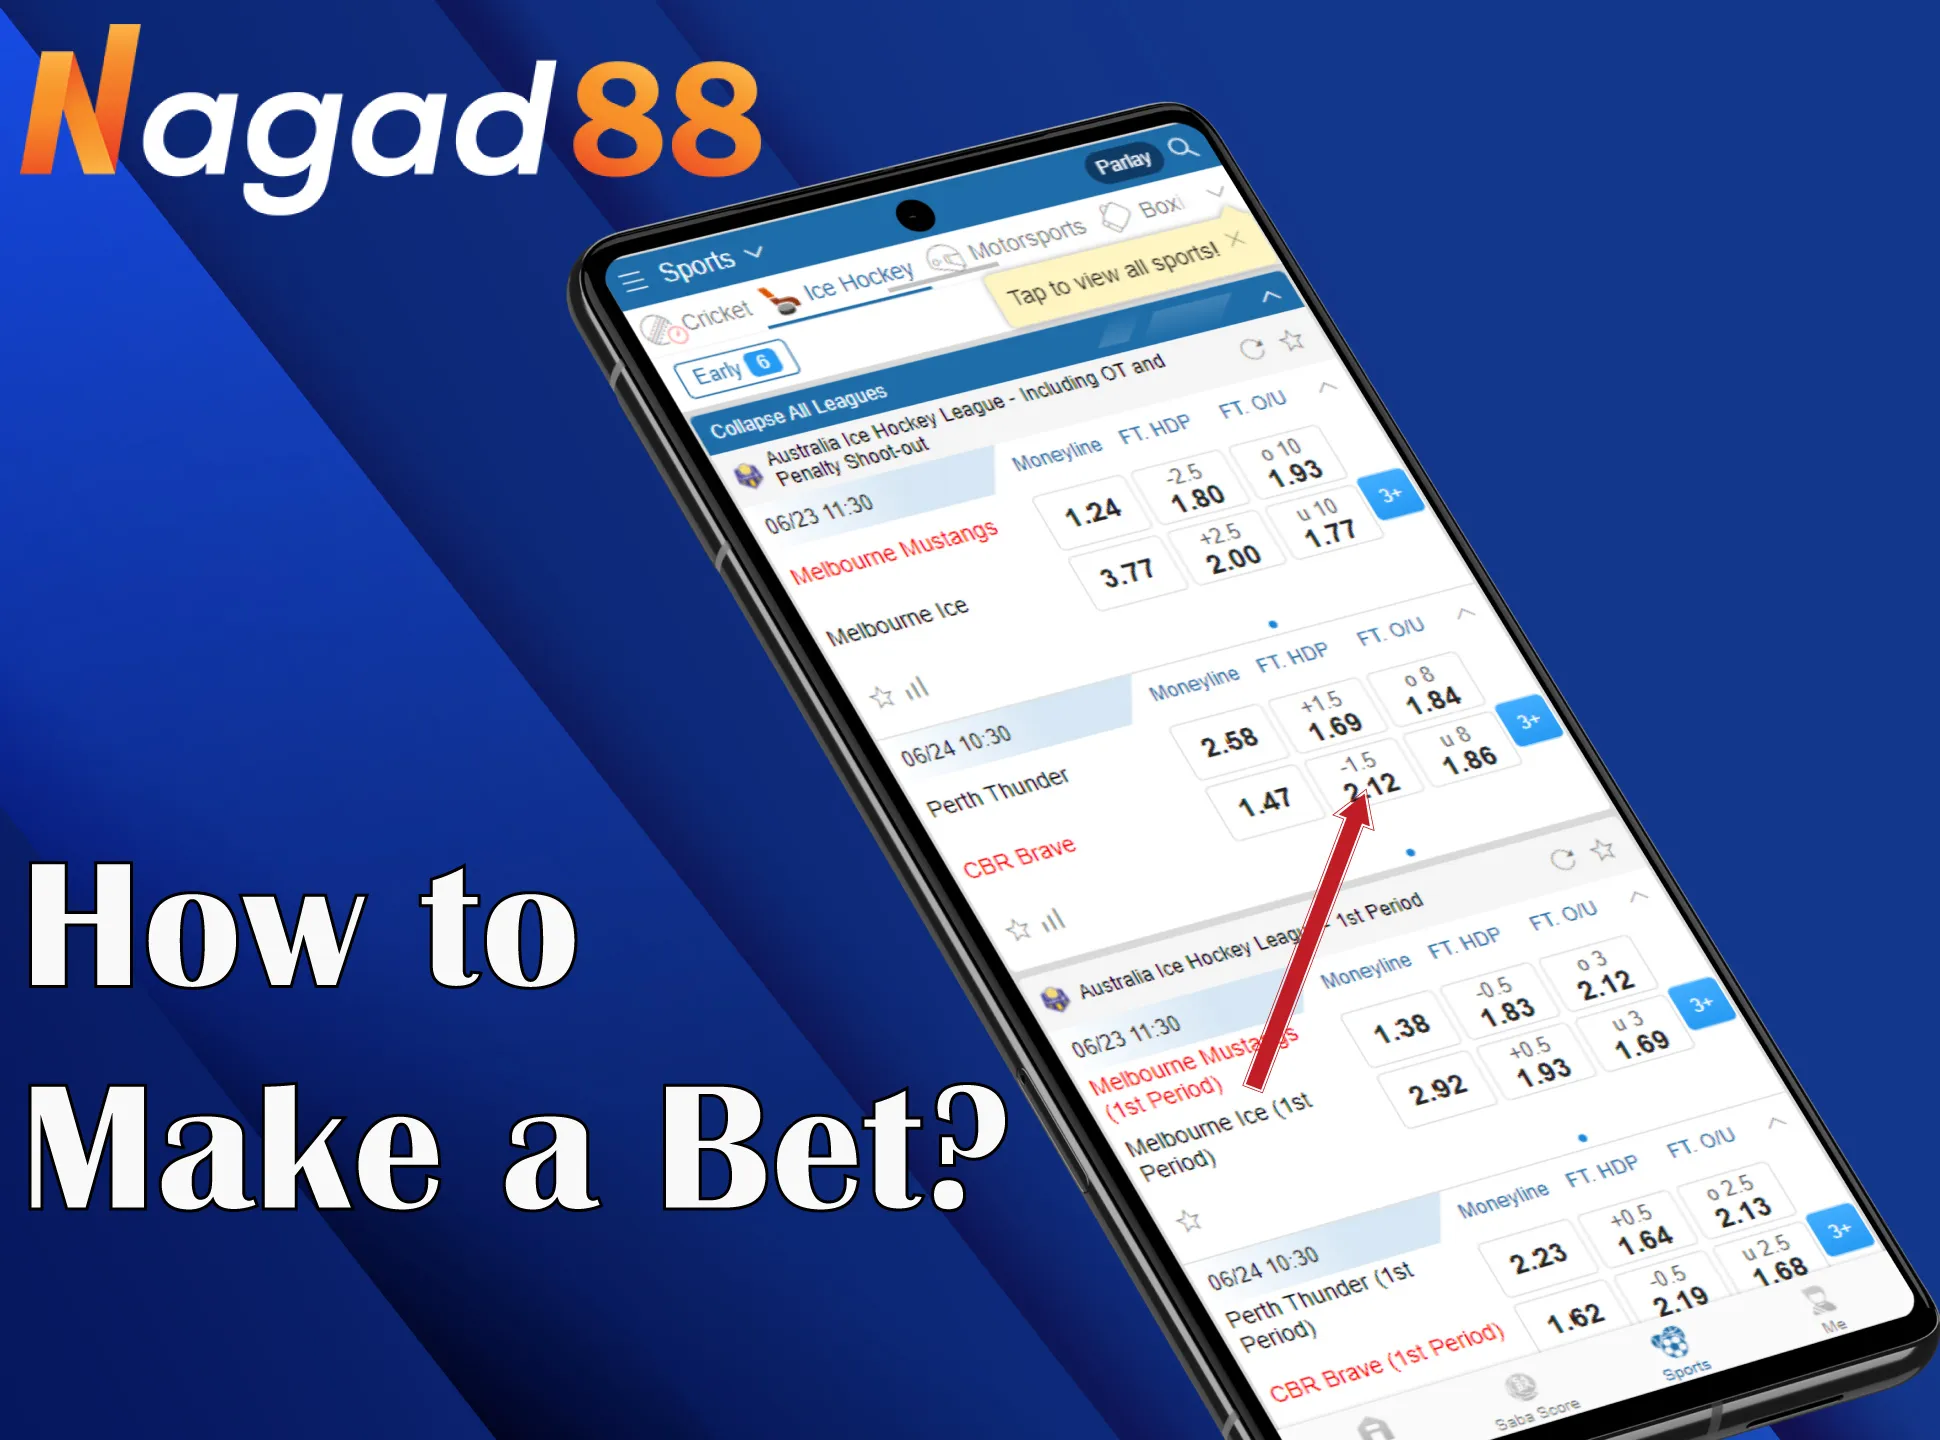 Open your account, deposit money and go to the sportsbook to place a bet.